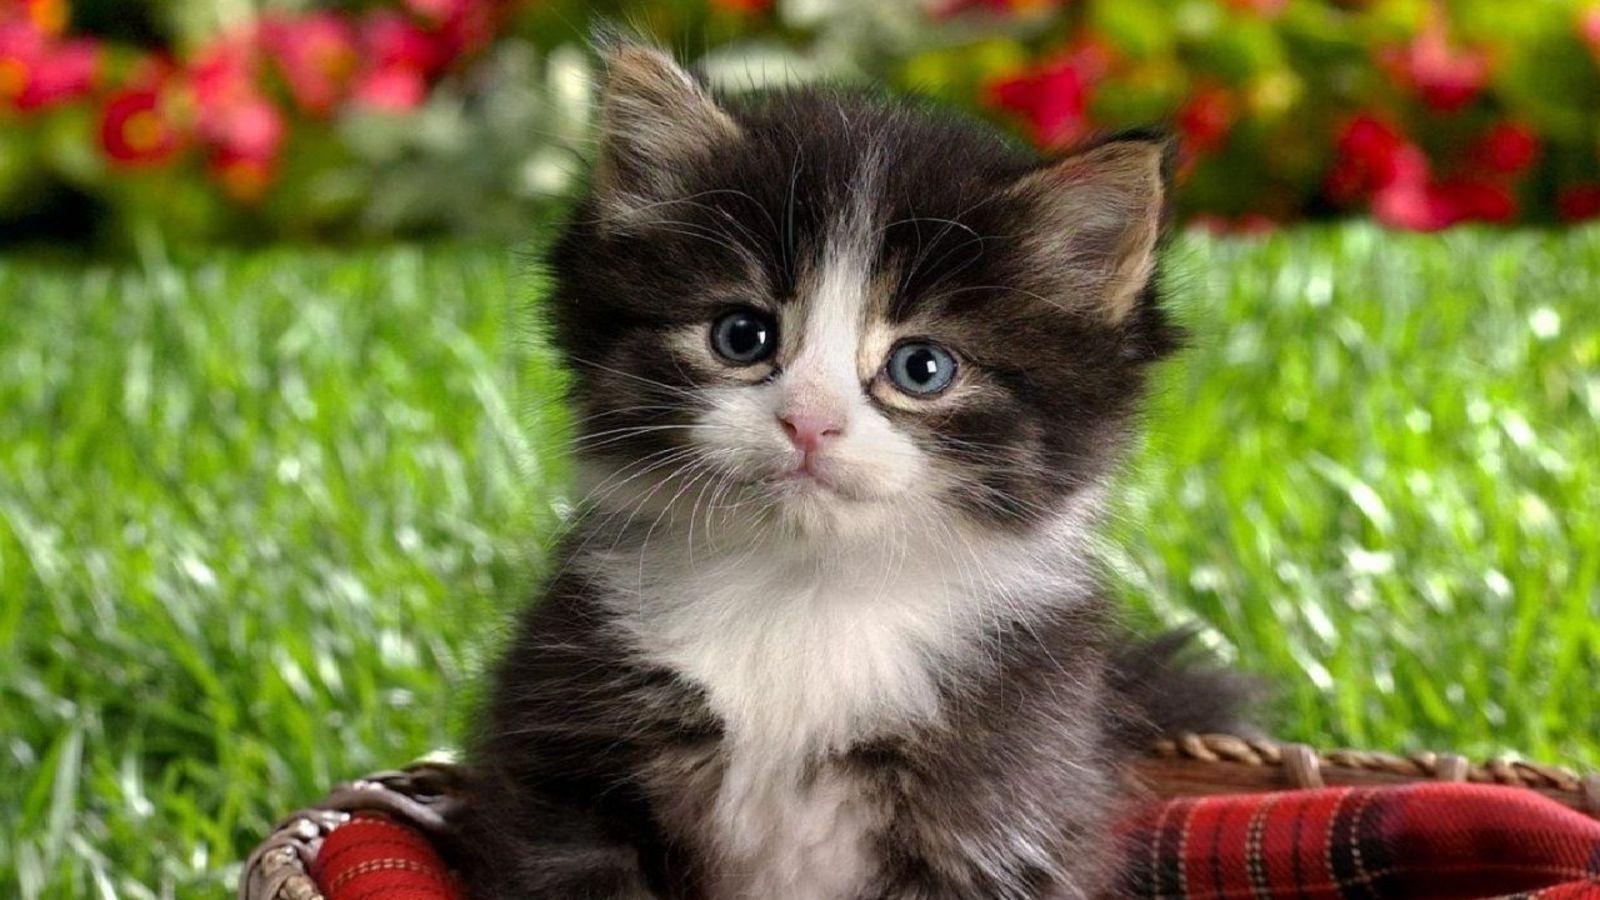 Baby Animals Image Kittens HD Wallpaper And